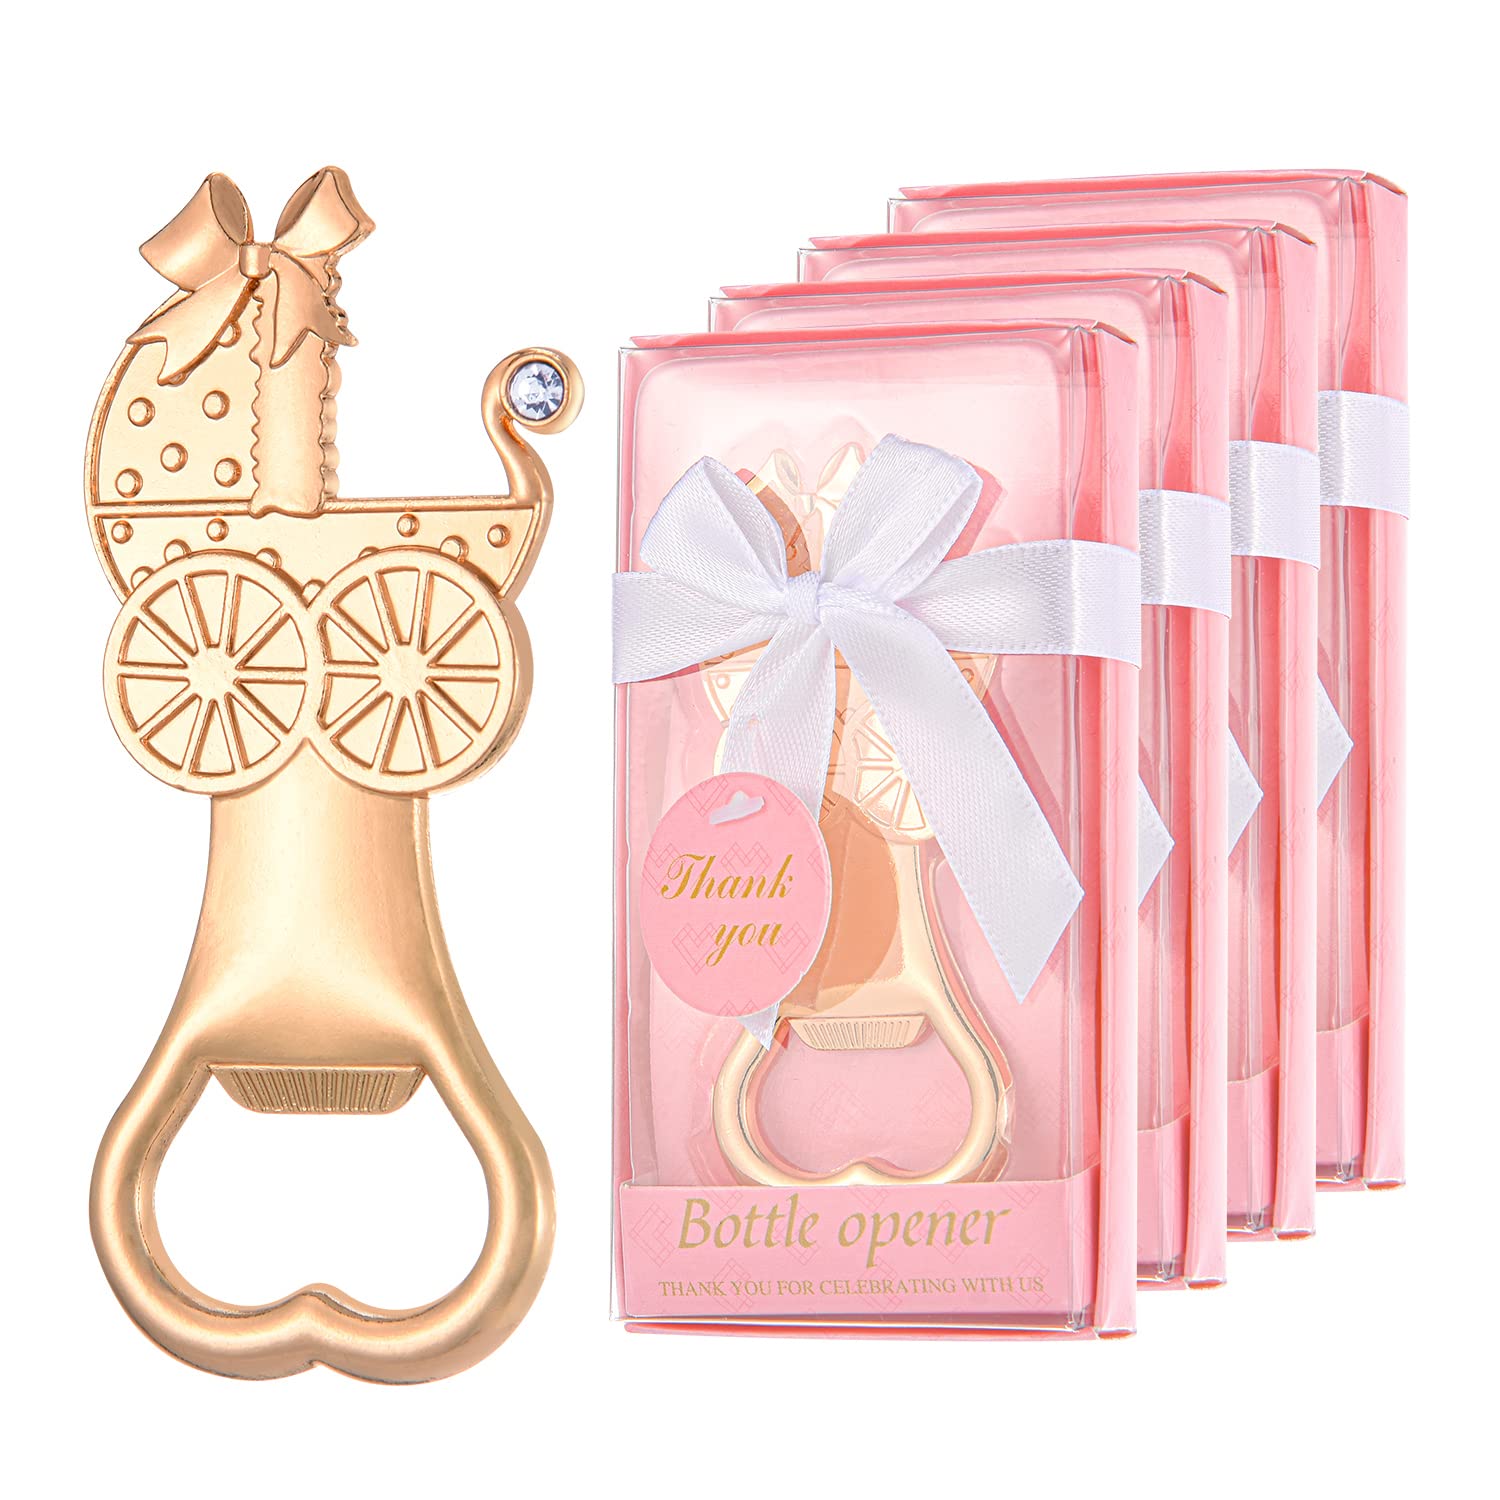 24 Pieces/packs Pink Baby Carriage Shaped Bottle Openers，Girl or Boy Baby Shower Favors, Gifts or Decorations for Guests with Gift Boxes Party Return Souvenirs Giveaways Bulk